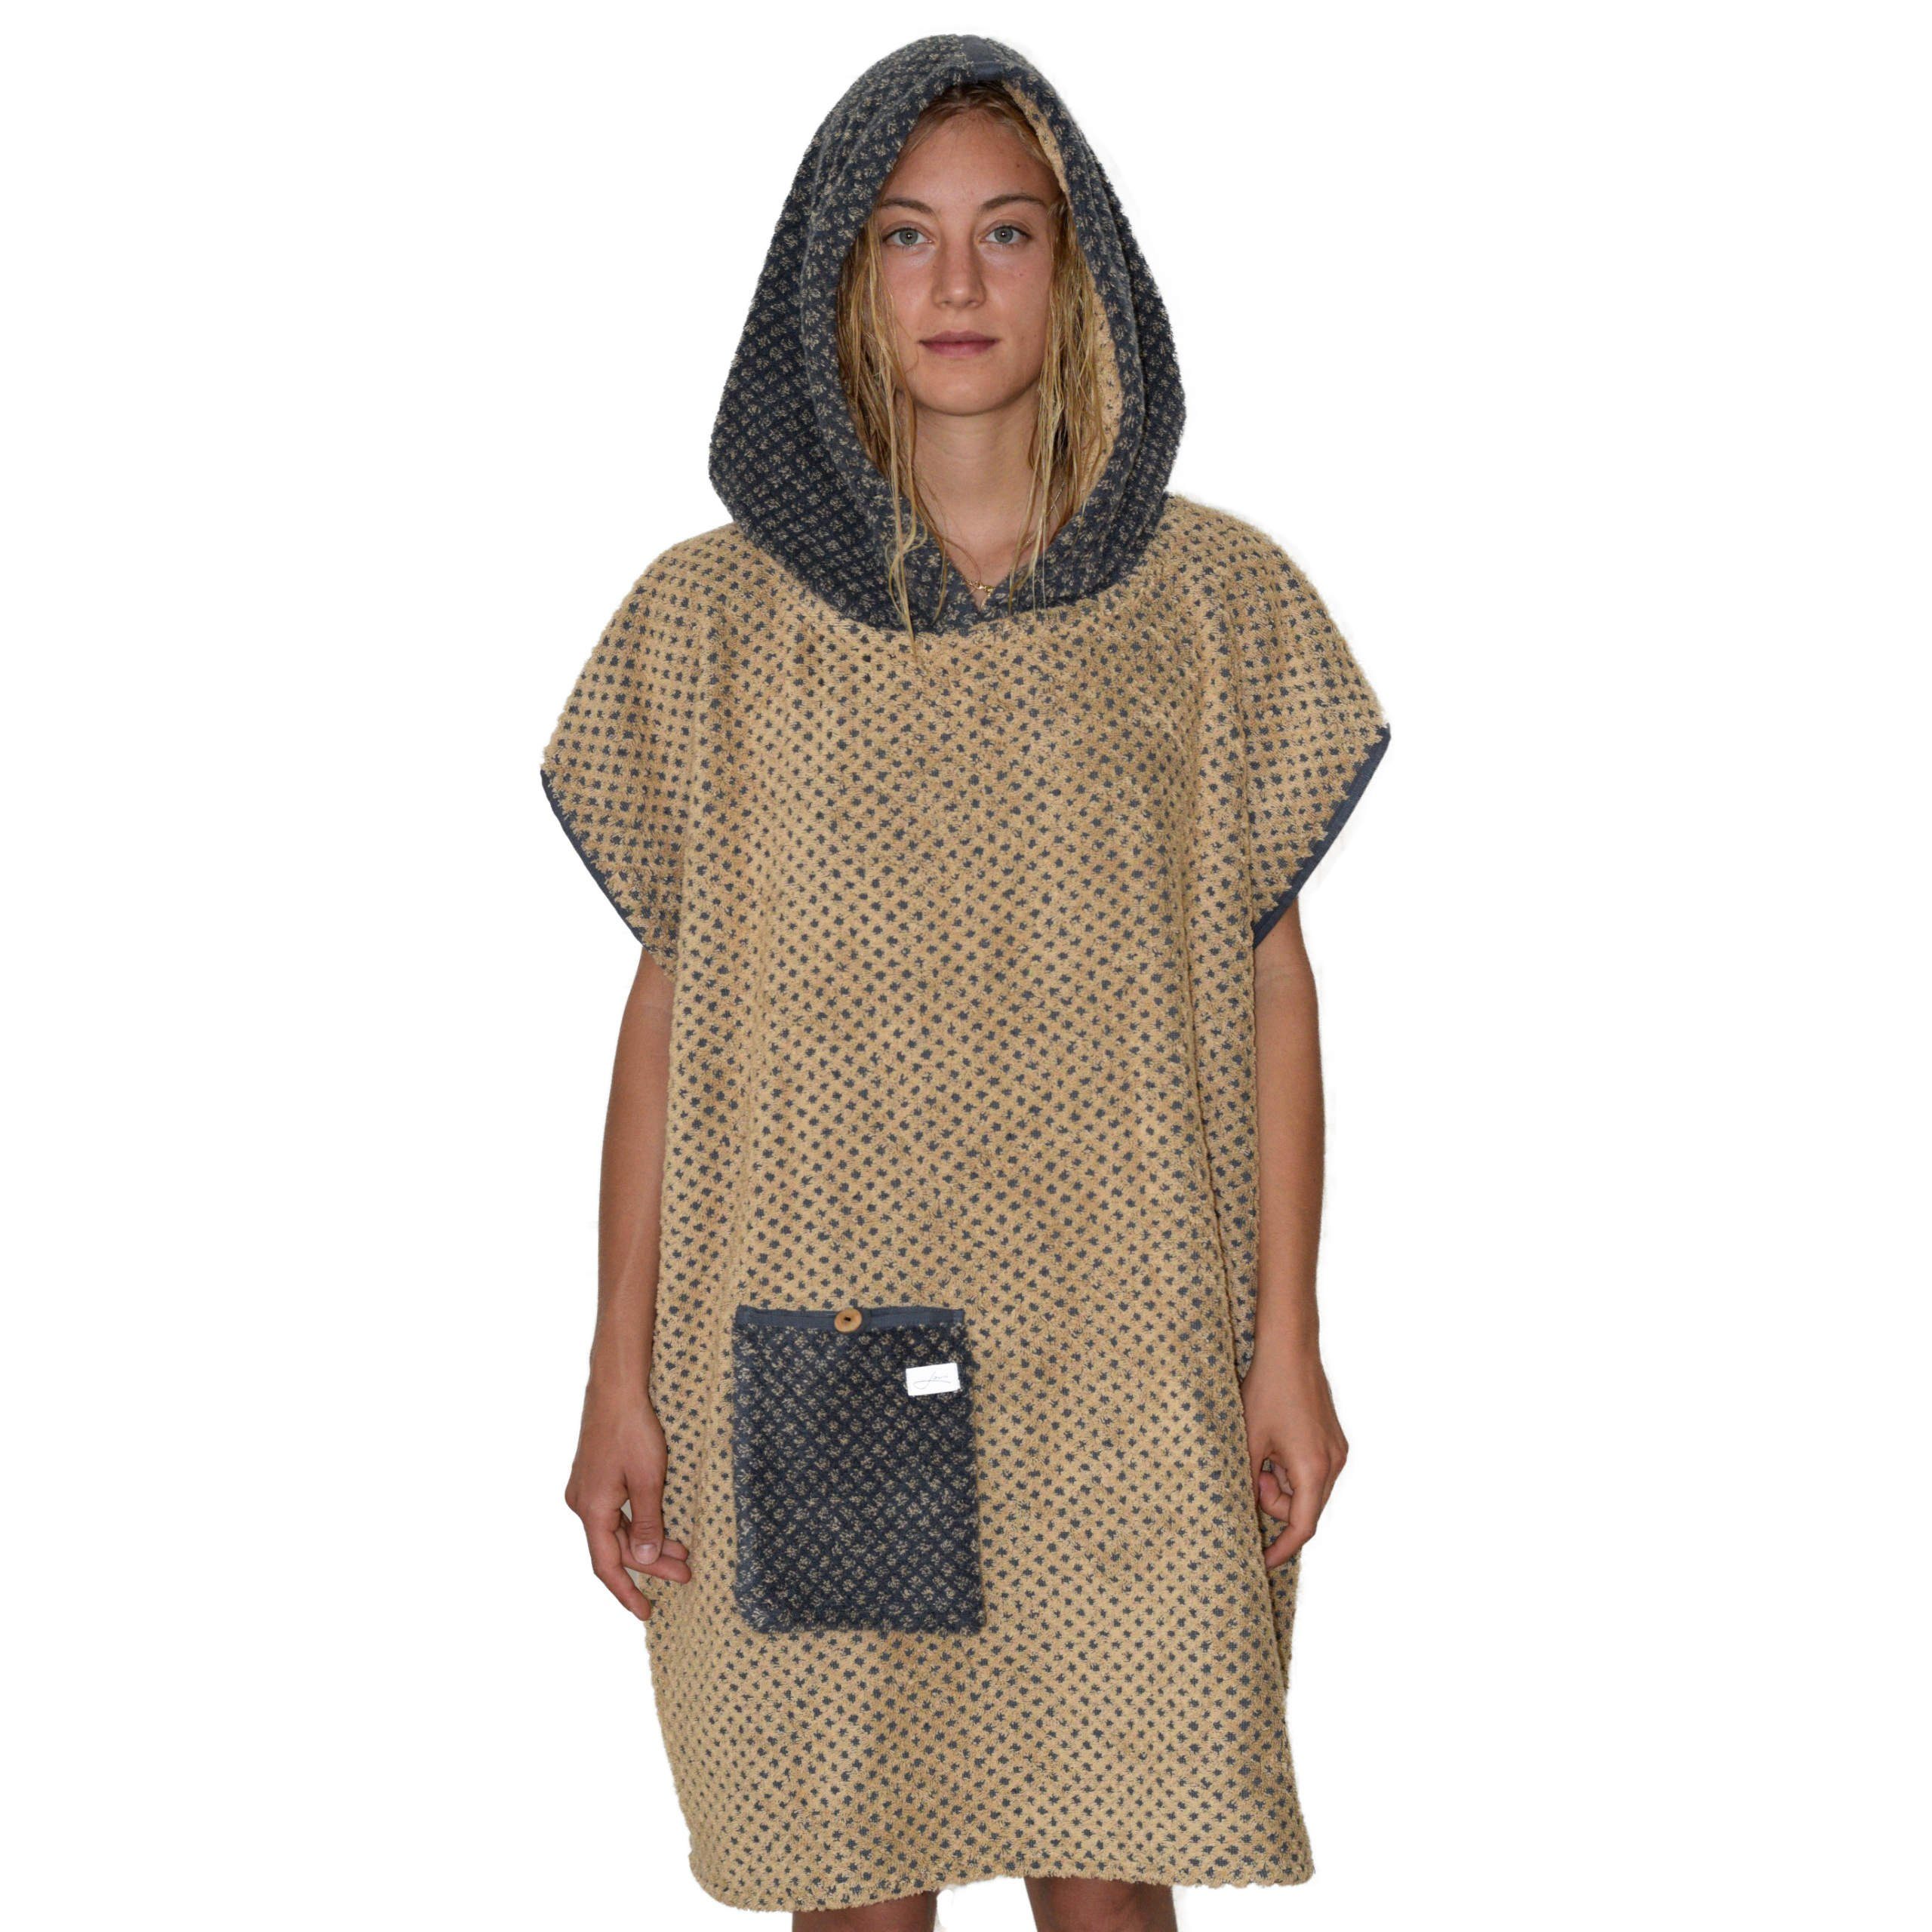 Lou-i Badeponcho Surfponcho Frottee Erwachsene Made in Germany Badeumhang, Kapuze, mit Kapuze und Tasche Gold